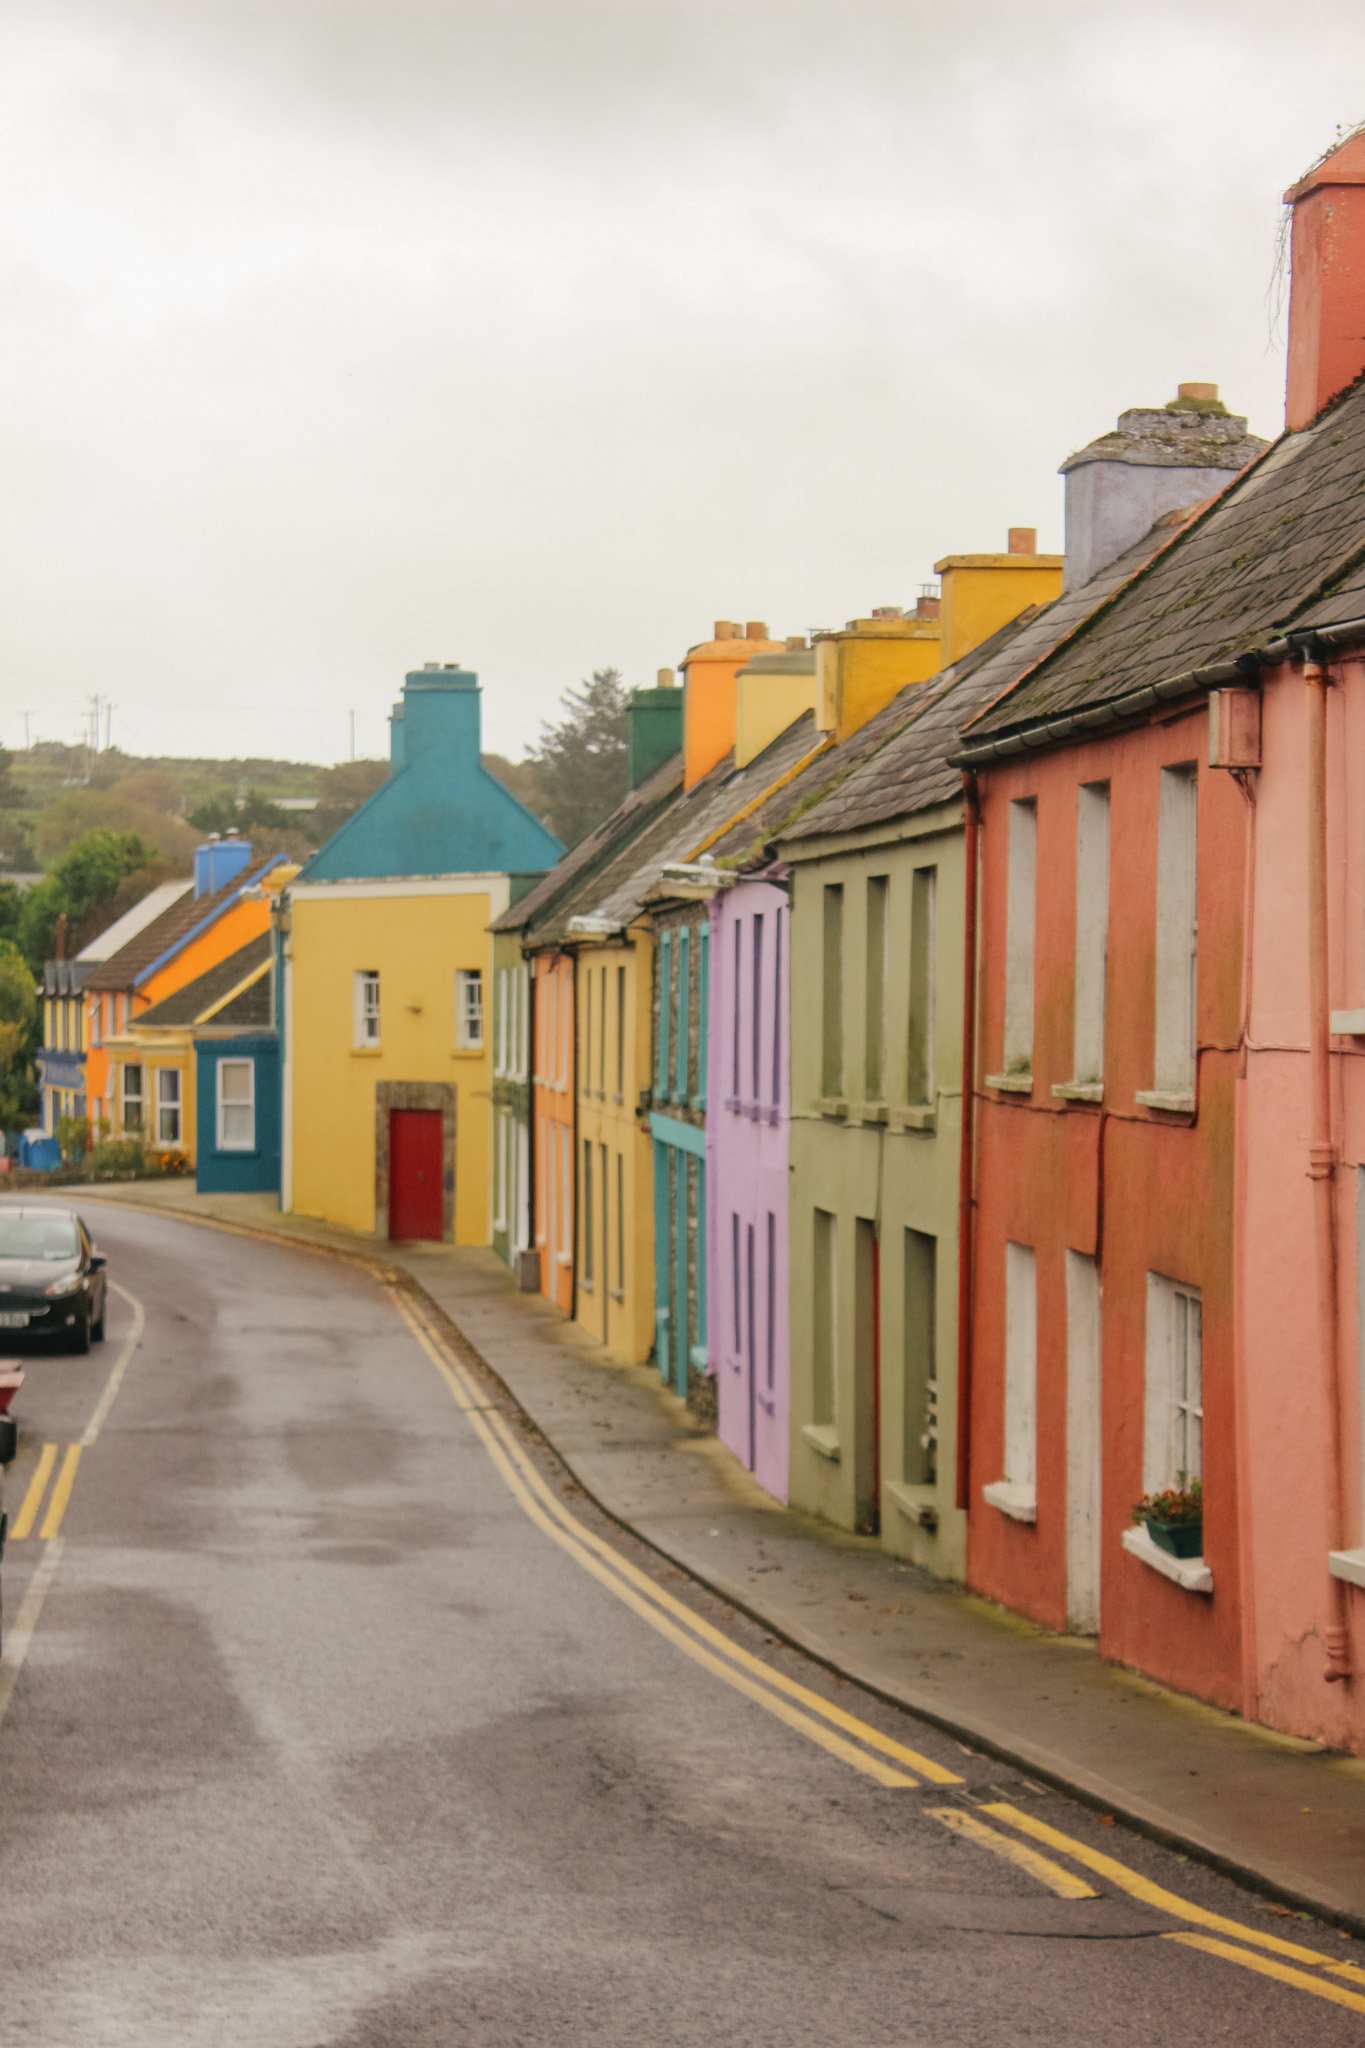 25 photos to inspire you to add an irish road trip to your bucket list